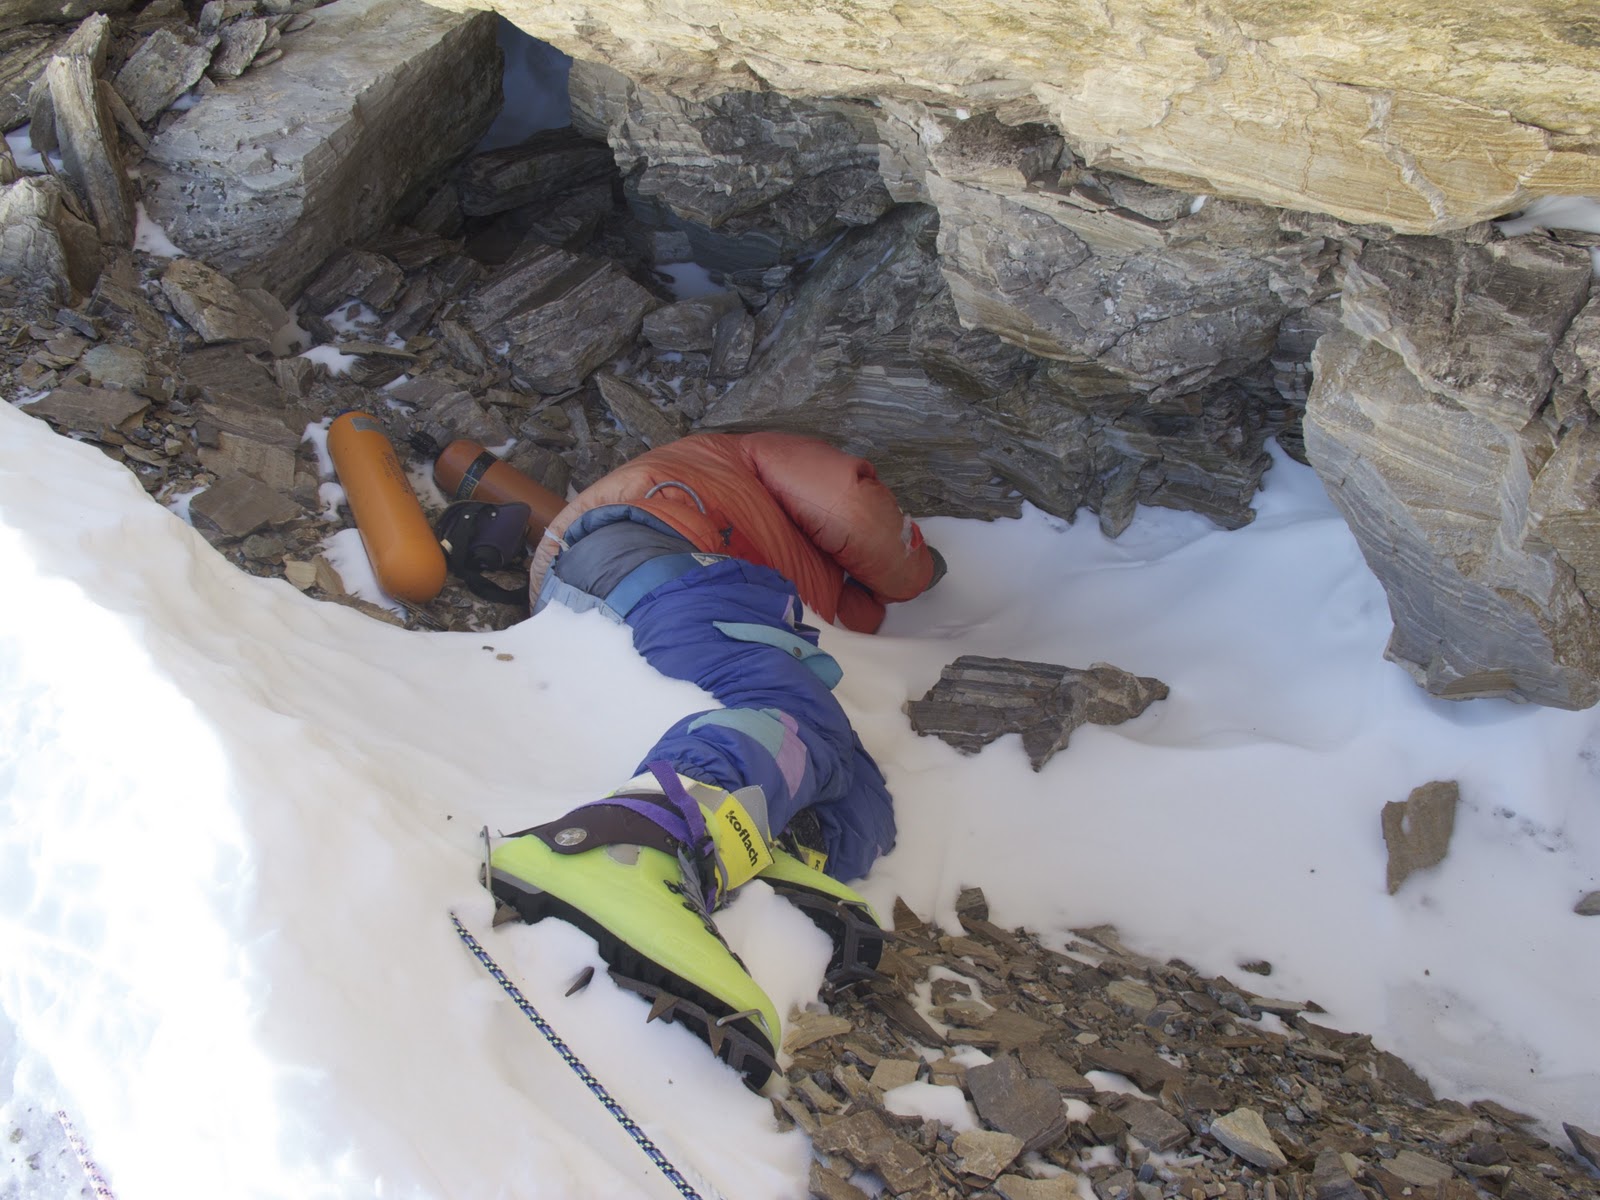 This body has been laying here on Mt Everest since 1996